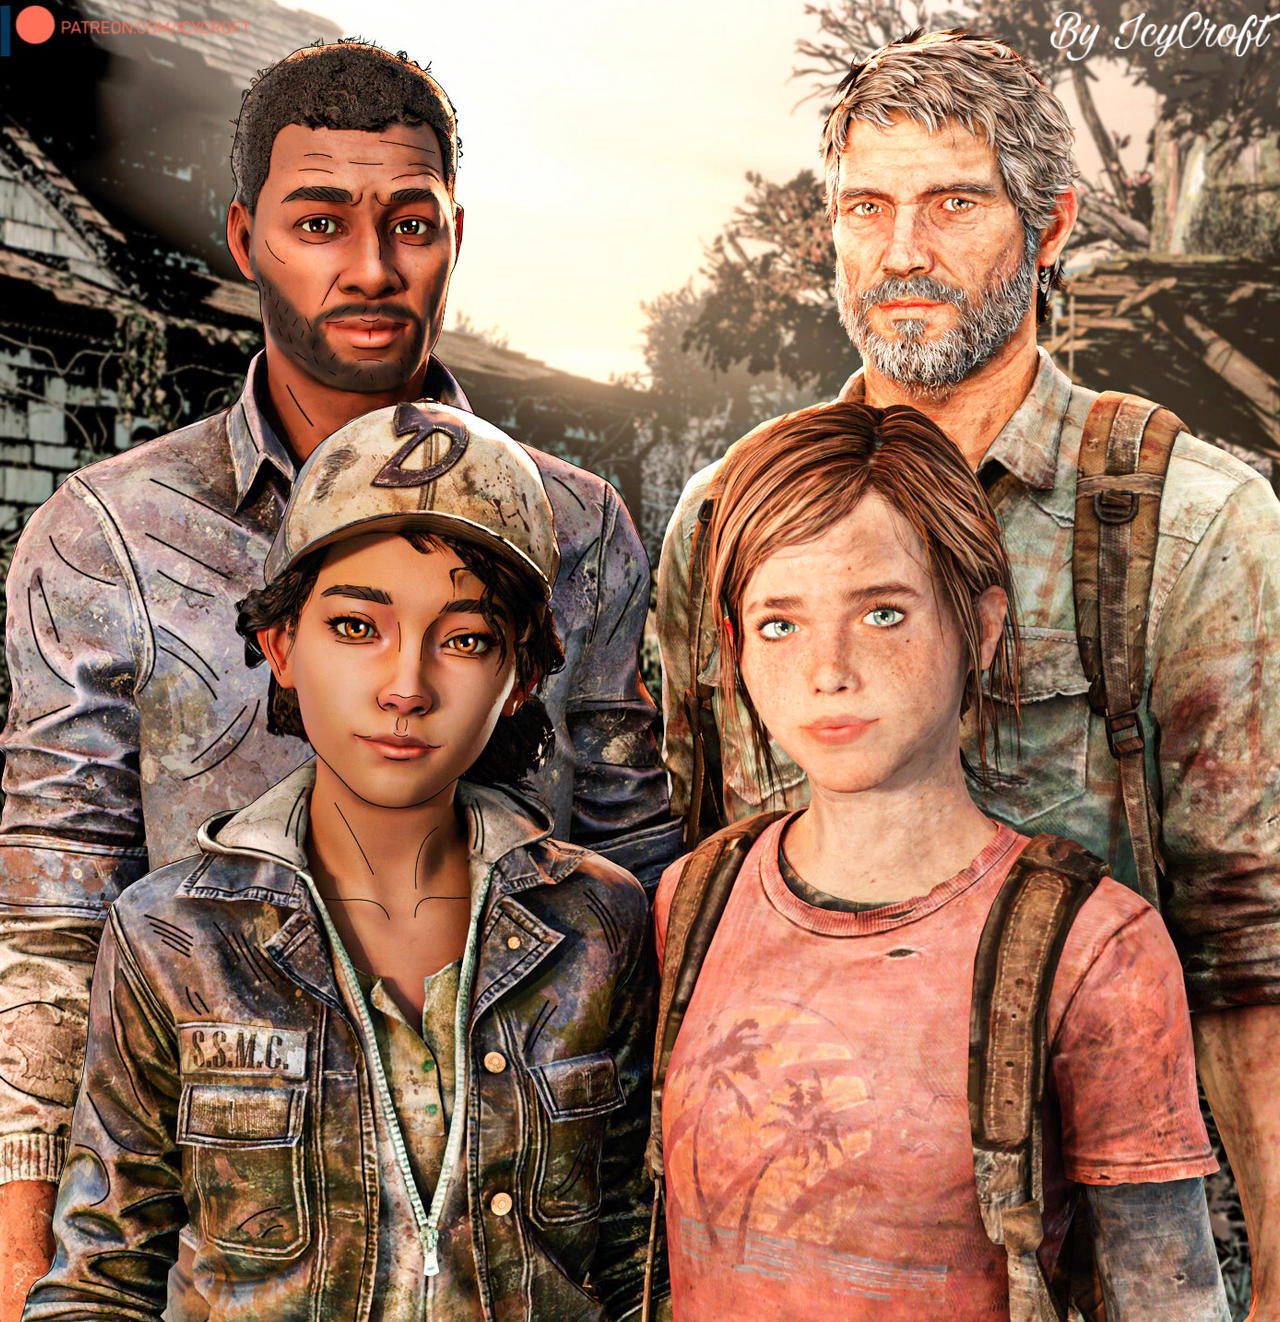 The Last Dead (The Walking Dead & The Last of Us crossover